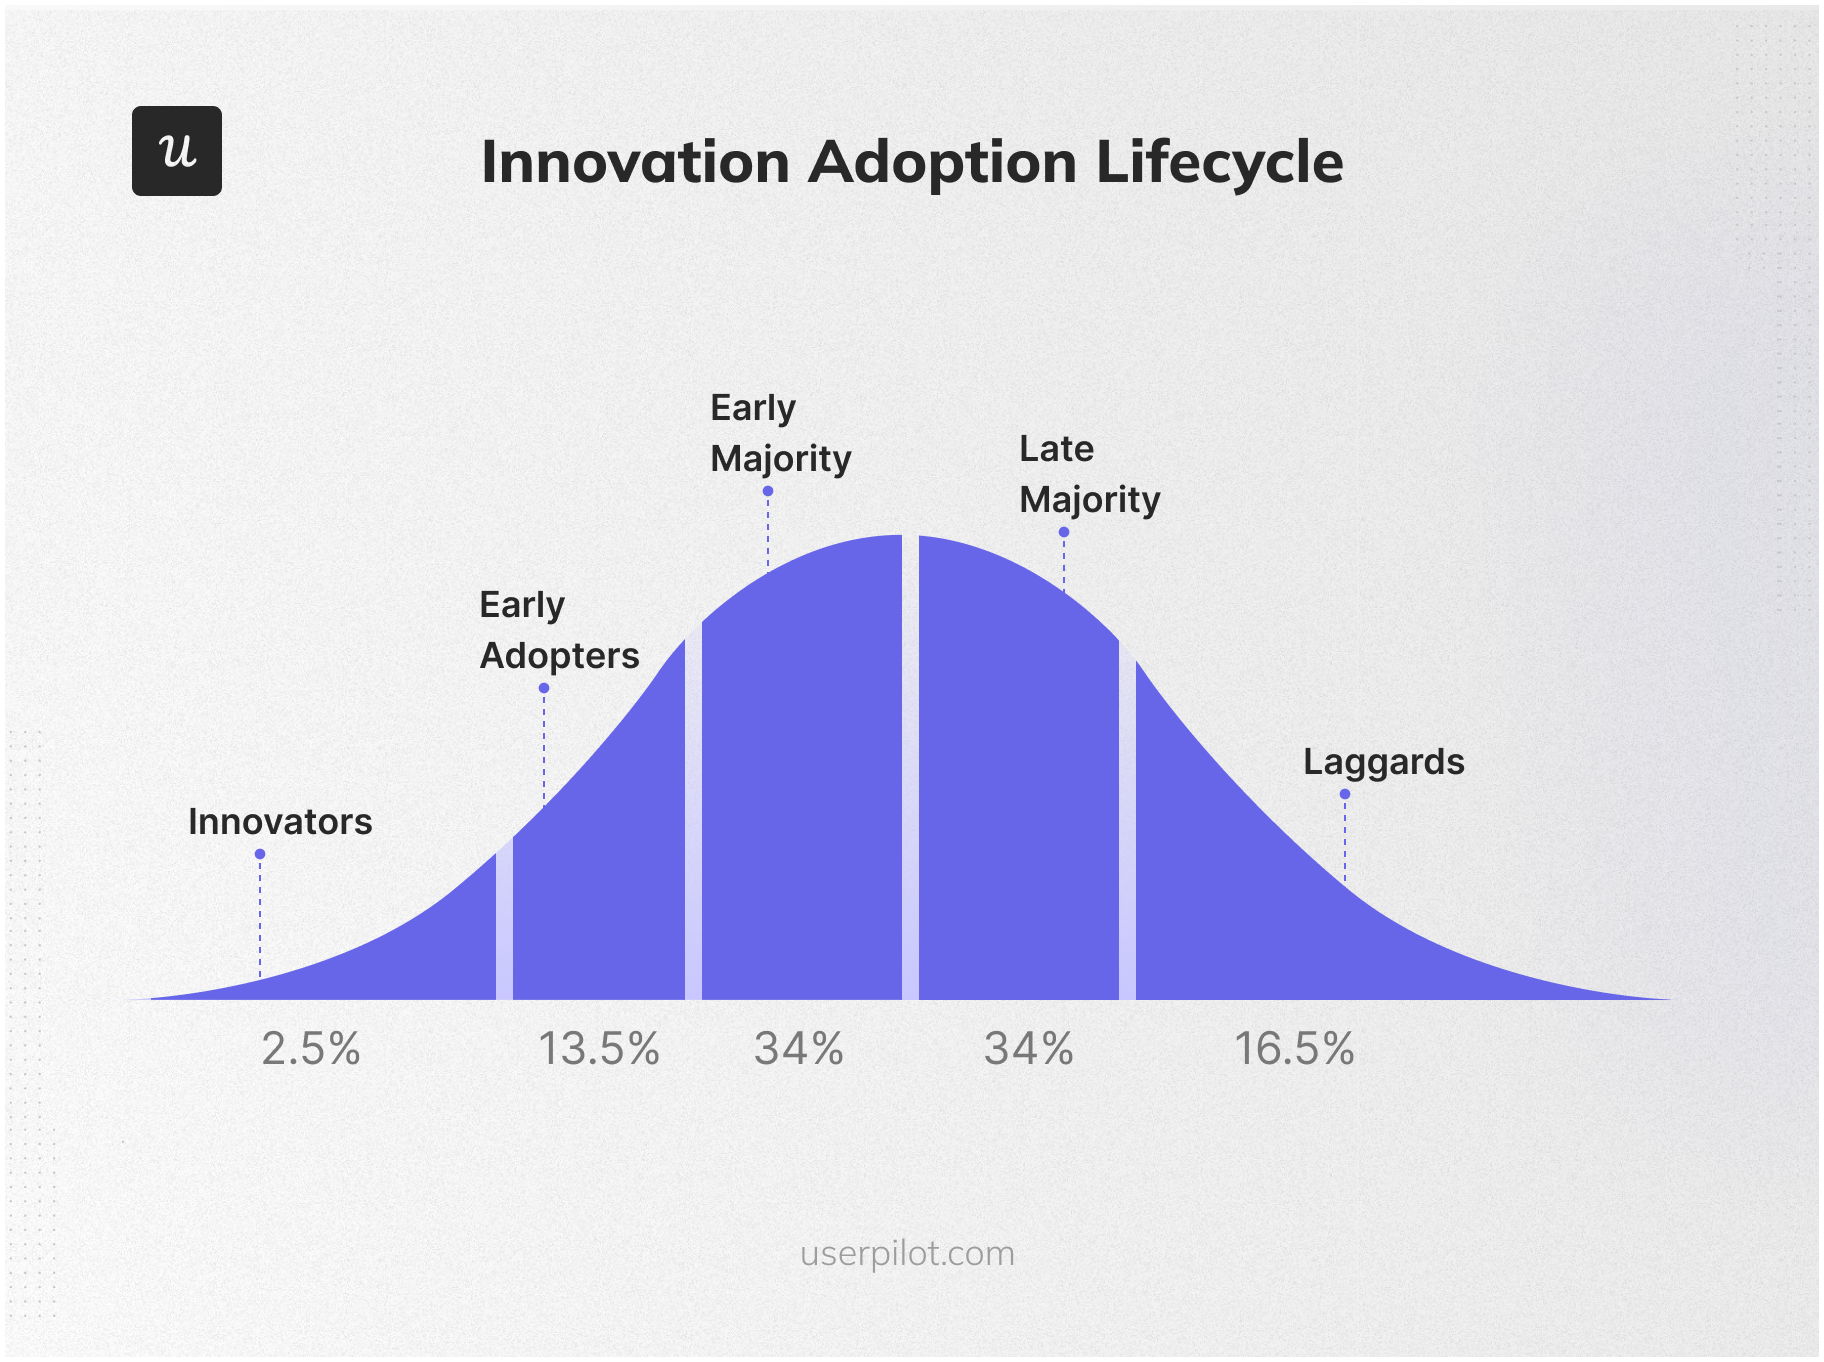 The product adoption curve helps segment users for product adoption strategy.